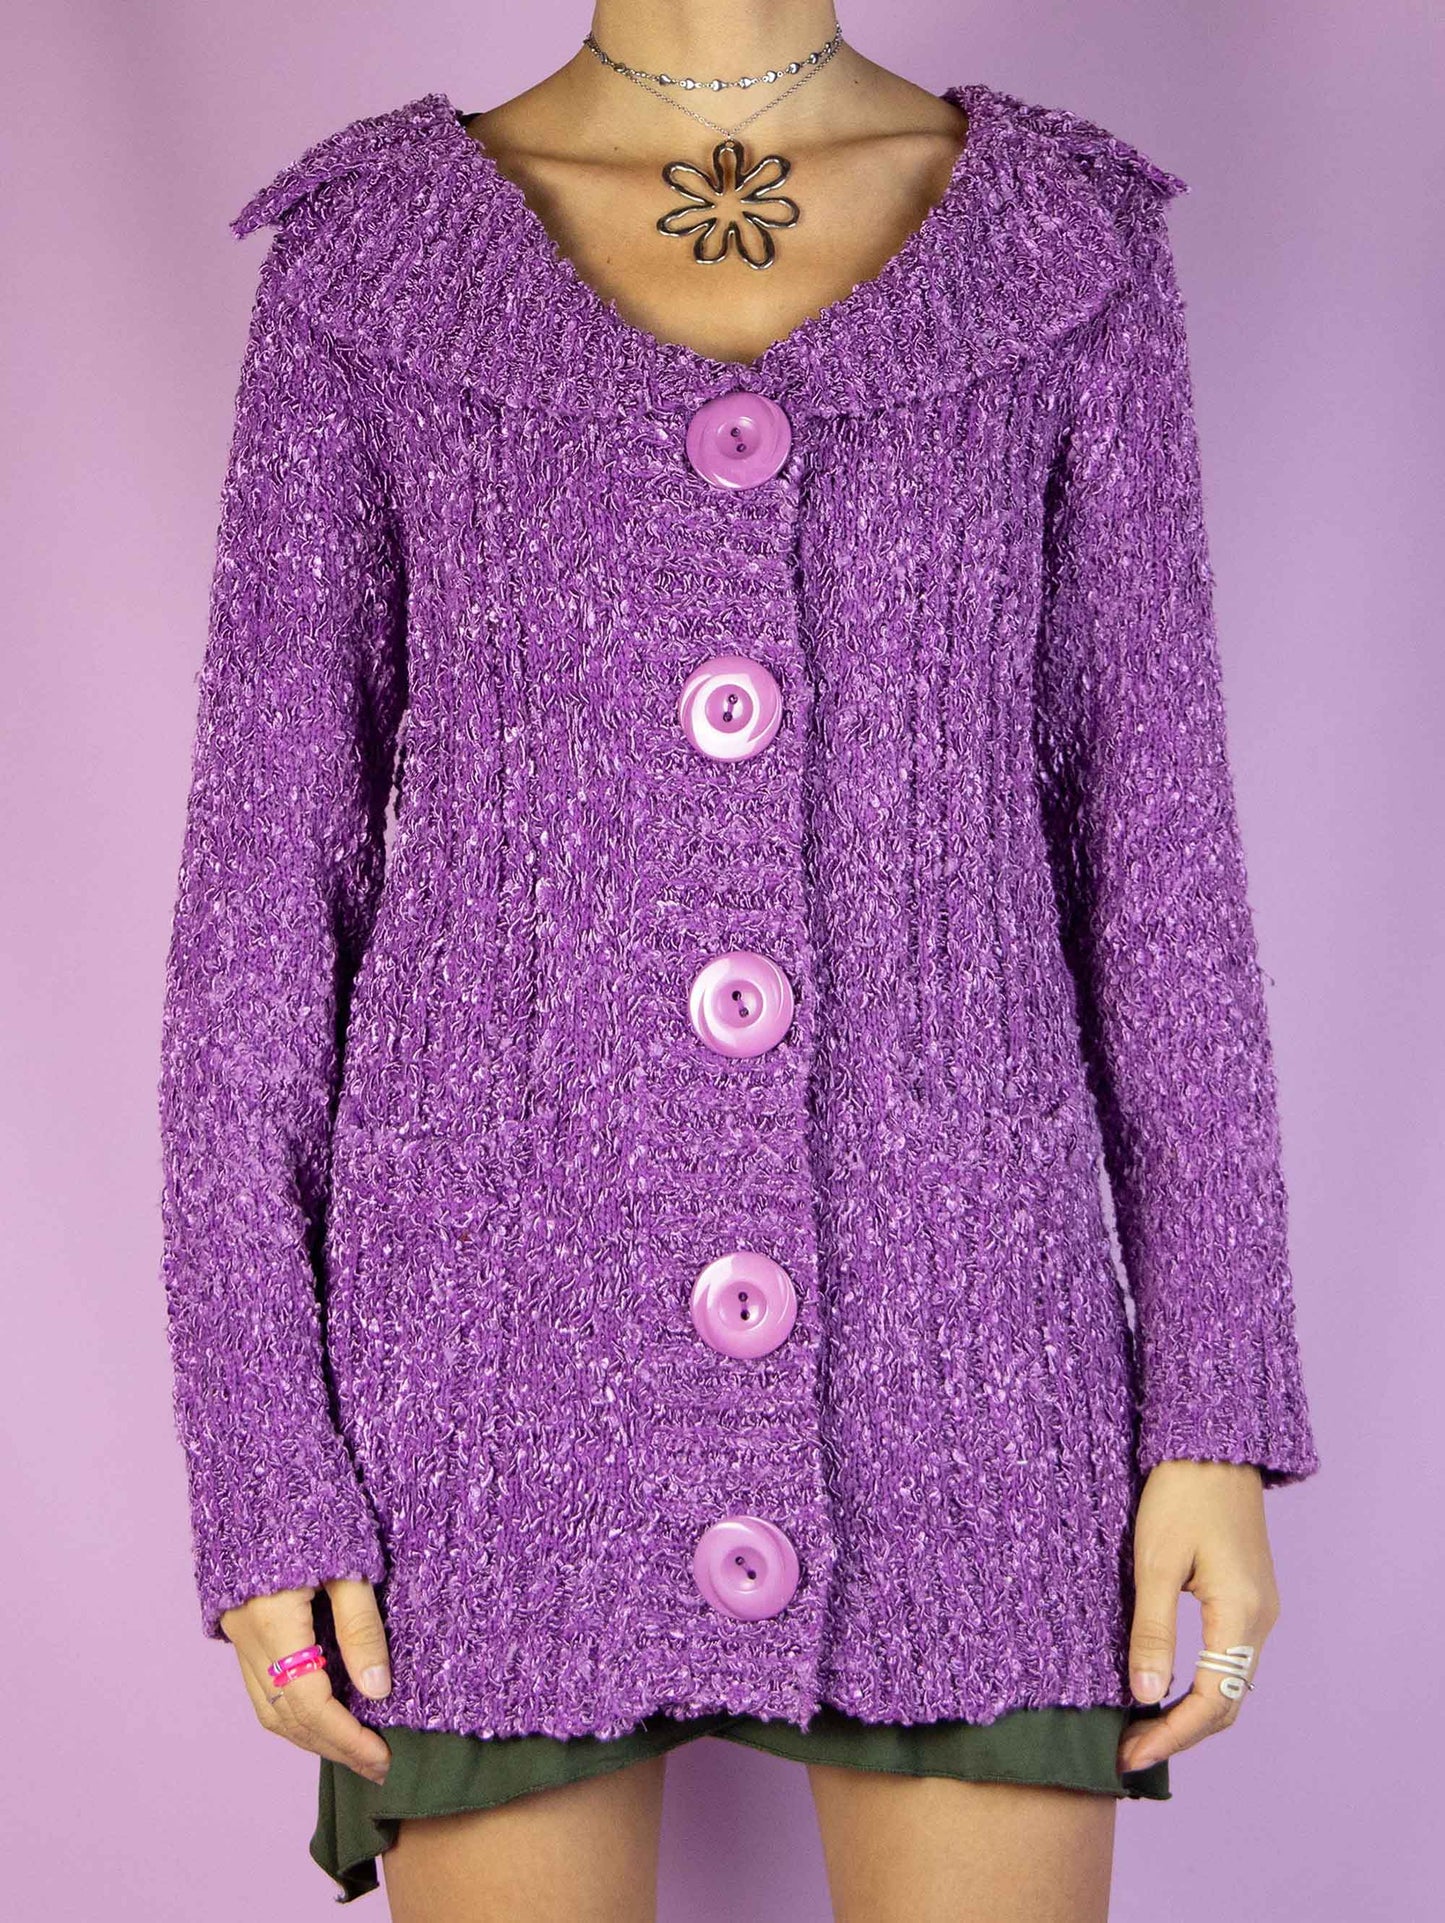 The Y2K Purple Knit Cardigan is a vintage 2000s winter chunky knit cardigan sweater with a collar, pockets, and big buttons.